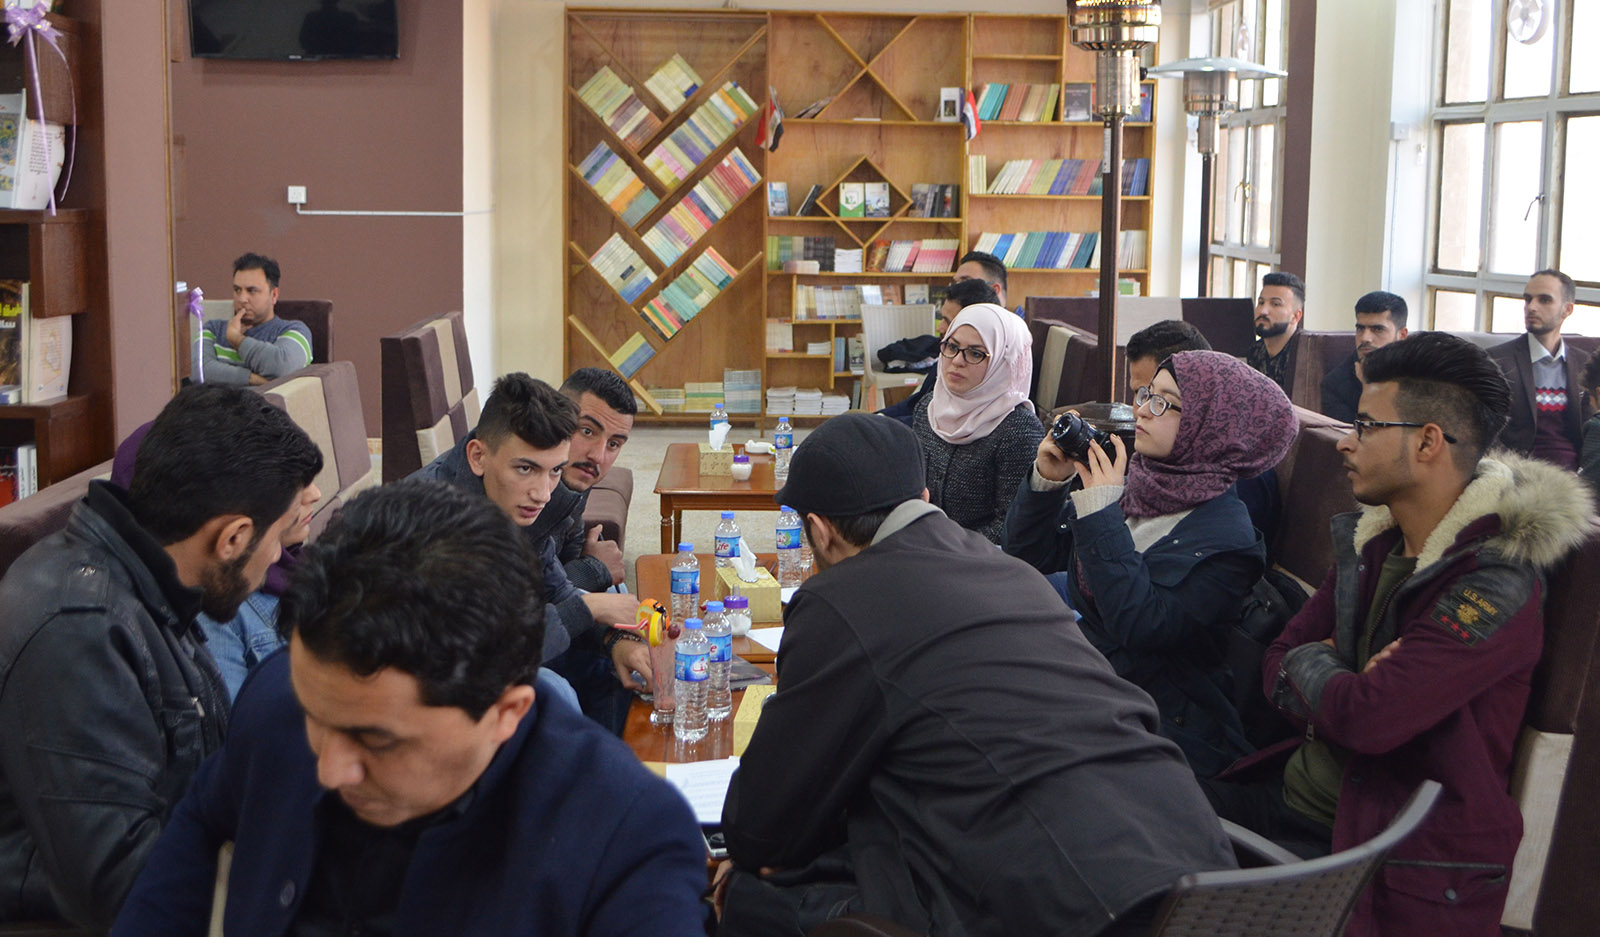 Mosul residents meeting at the Book Forum café, January 6, 2018